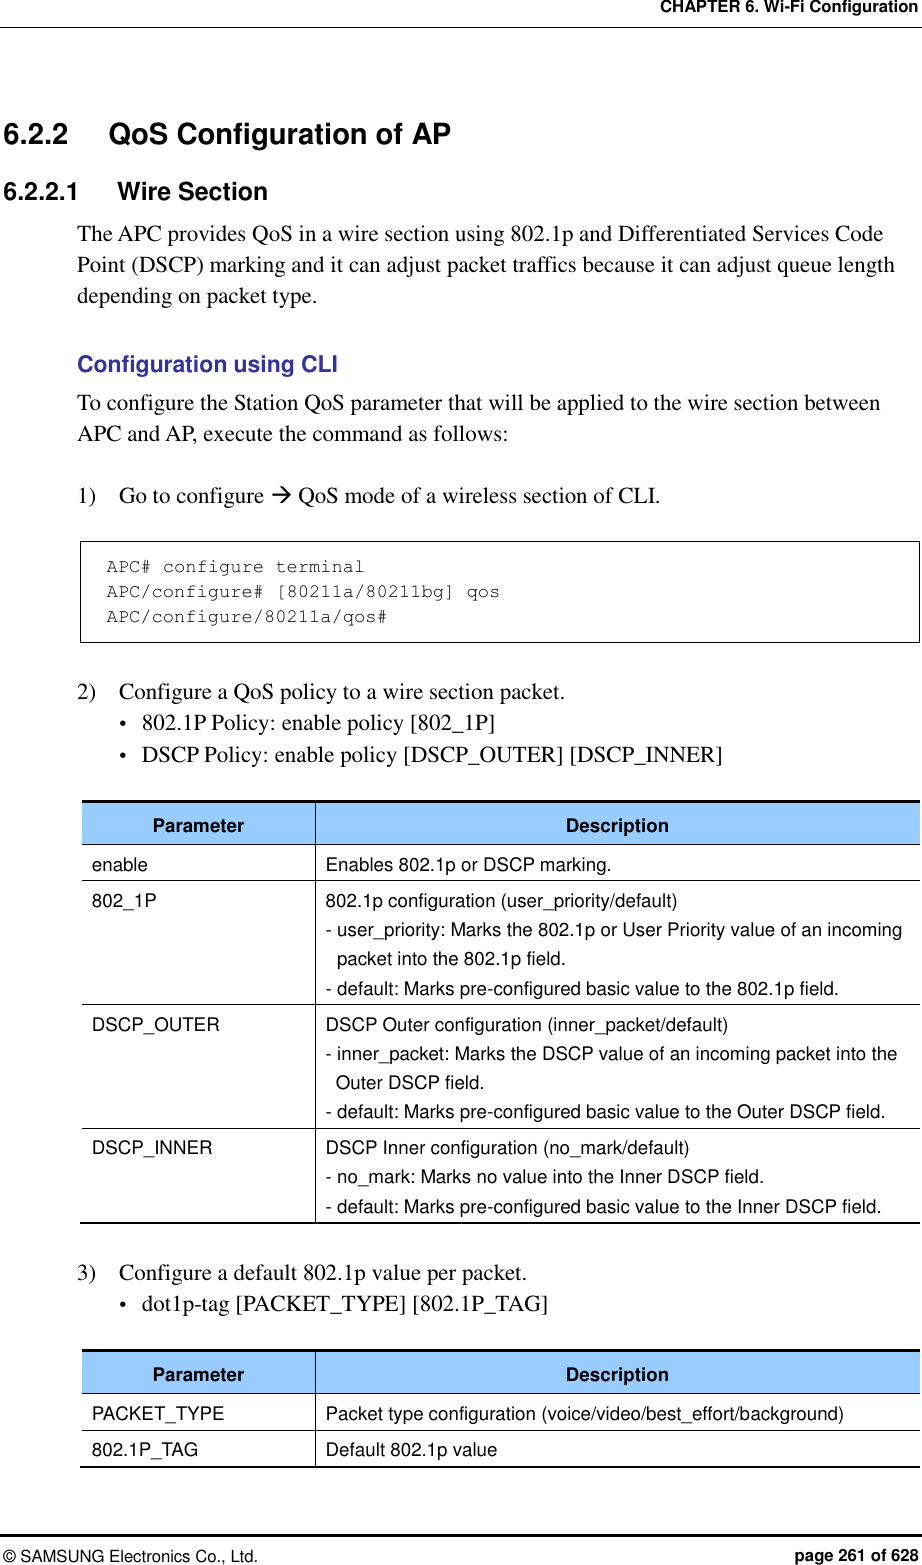 CHAPTER 6. Wi-Fi Configuration ©  SAMSUNG Electronics Co., Ltd.  page 261 of 628 6.2.2  QoS Configuration of AP 6.2.2.1  Wire Section The APC provides QoS in a wire section using 802.1p and Differentiated Services Code Point (DSCP) marking and it can adjust packet traffics because it can adjust queue length depending on packet type.    Configuration using CLI To configure the Station QoS parameter that will be applied to the wire section between APC and AP, execute the command as follows:  1)    Go to configure  QoS mode of a wireless section of CLI.    APC# configure terminal APC/configure# [80211a/80211bg] qos APC/configure/80211a/qos#  2)    Configure a QoS policy to a wire section packet.    802.1P Policy: enable policy [802_1P]  DSCP Policy: enable policy [DSCP_OUTER] [DSCP_INNER]  Parameter Description enable Enables 802.1p or DSCP marking. 802_1P 802.1p configuration (user_priority/default) - user_priority: Marks the 802.1p or User Priority value of an incoming packet into the 802.1p field. - default: Marks pre-configured basic value to the 802.1p field. DSCP_OUTER DSCP Outer configuration (inner_packet/default) - inner_packet: Marks the DSCP value of an incoming packet into the Outer DSCP field. - default: Marks pre-configured basic value to the Outer DSCP field. DSCP_INNER DSCP Inner configuration (no_mark/default) - no_mark: Marks no value into the Inner DSCP field. - default: Marks pre-configured basic value to the Inner DSCP field.  3)    Configure a default 802.1p value per packet.  dot1p-tag [PACKET_TYPE] [802.1P_TAG]  Parameter Description PACKET_TYPE Packet type configuration (voice/video/best_effort/background) 802.1P_TAG Default 802.1p value  